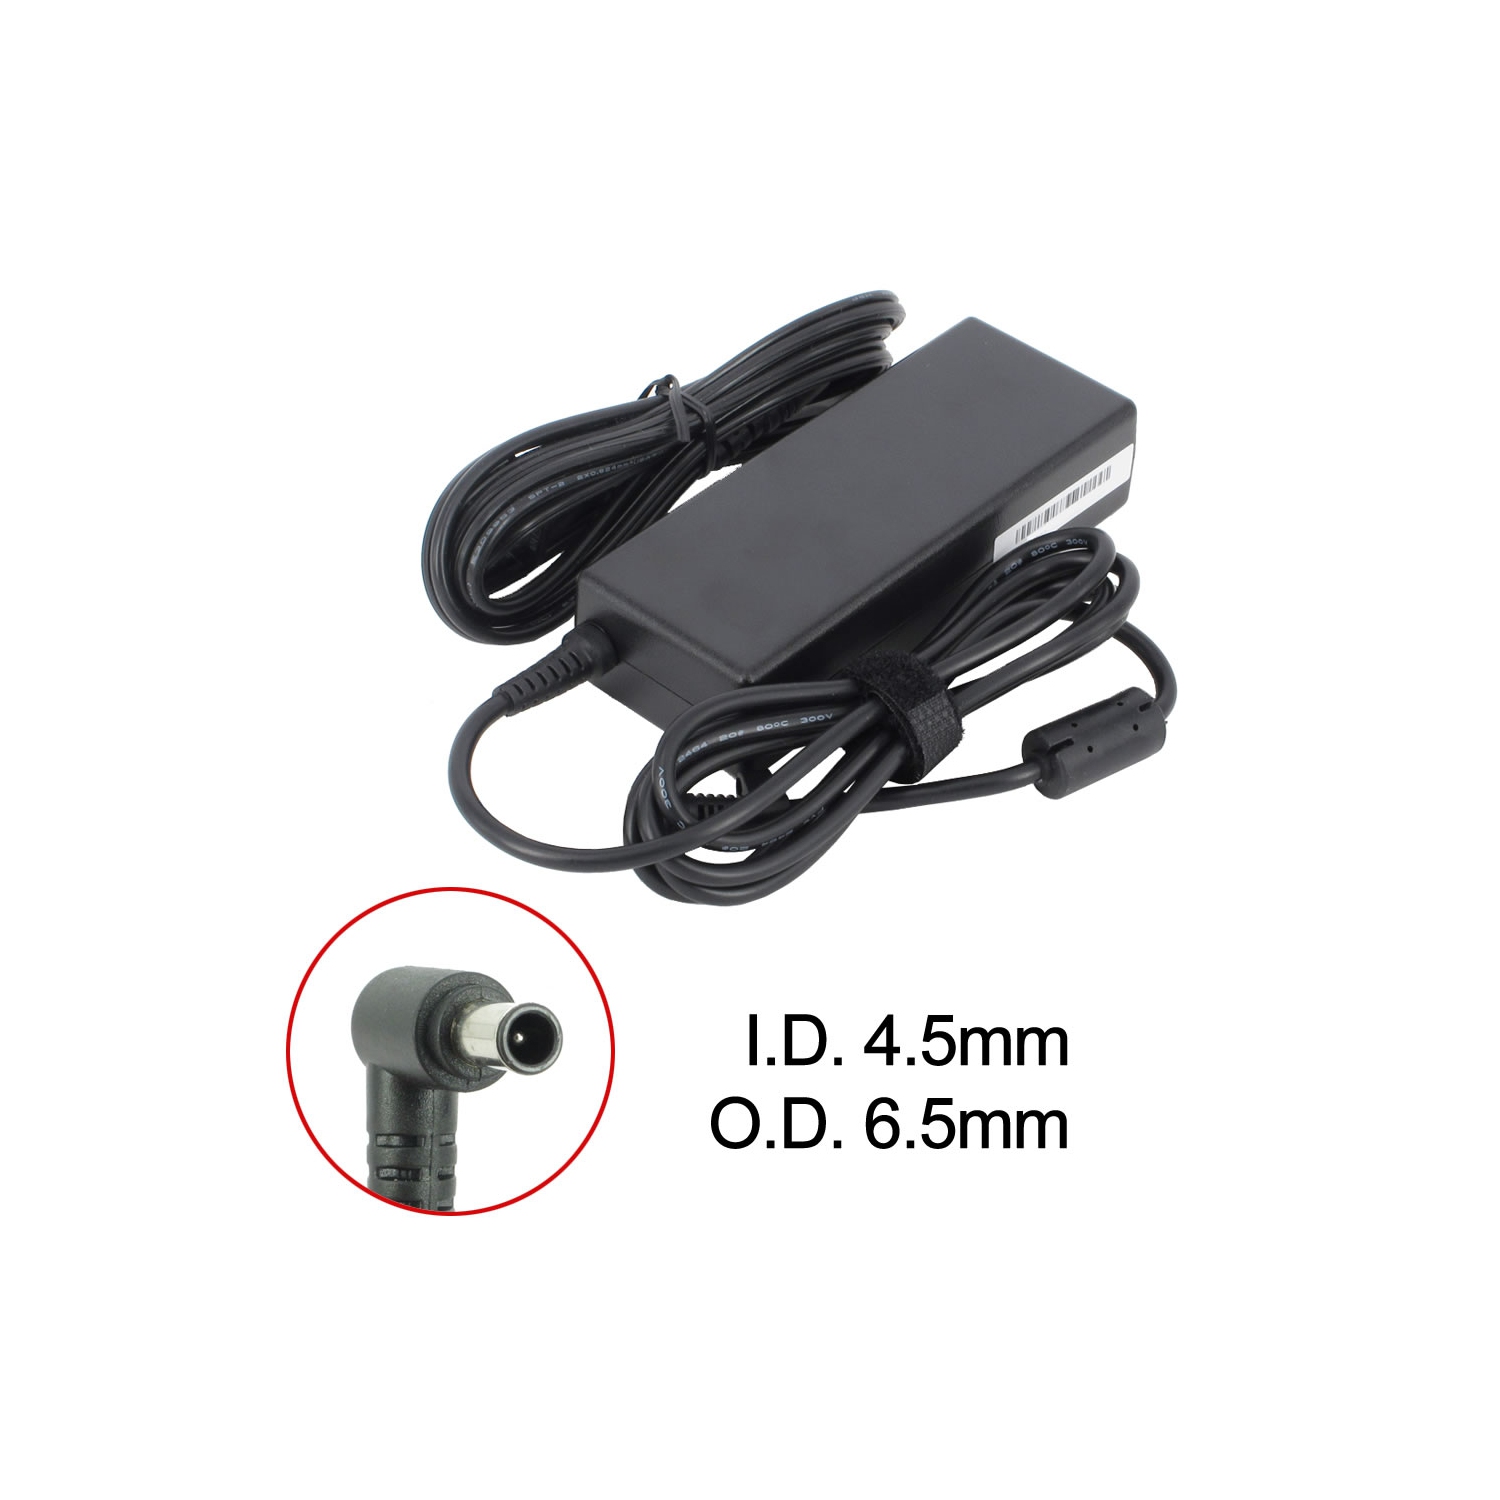 Brand New Laptop AC Adapter for Sony VAIO VGN-CR307, PCGA-AC19V10, PCGA-AC19V3, VGP-AC19V20, VGP-AC19V30, VGP-AC19V51